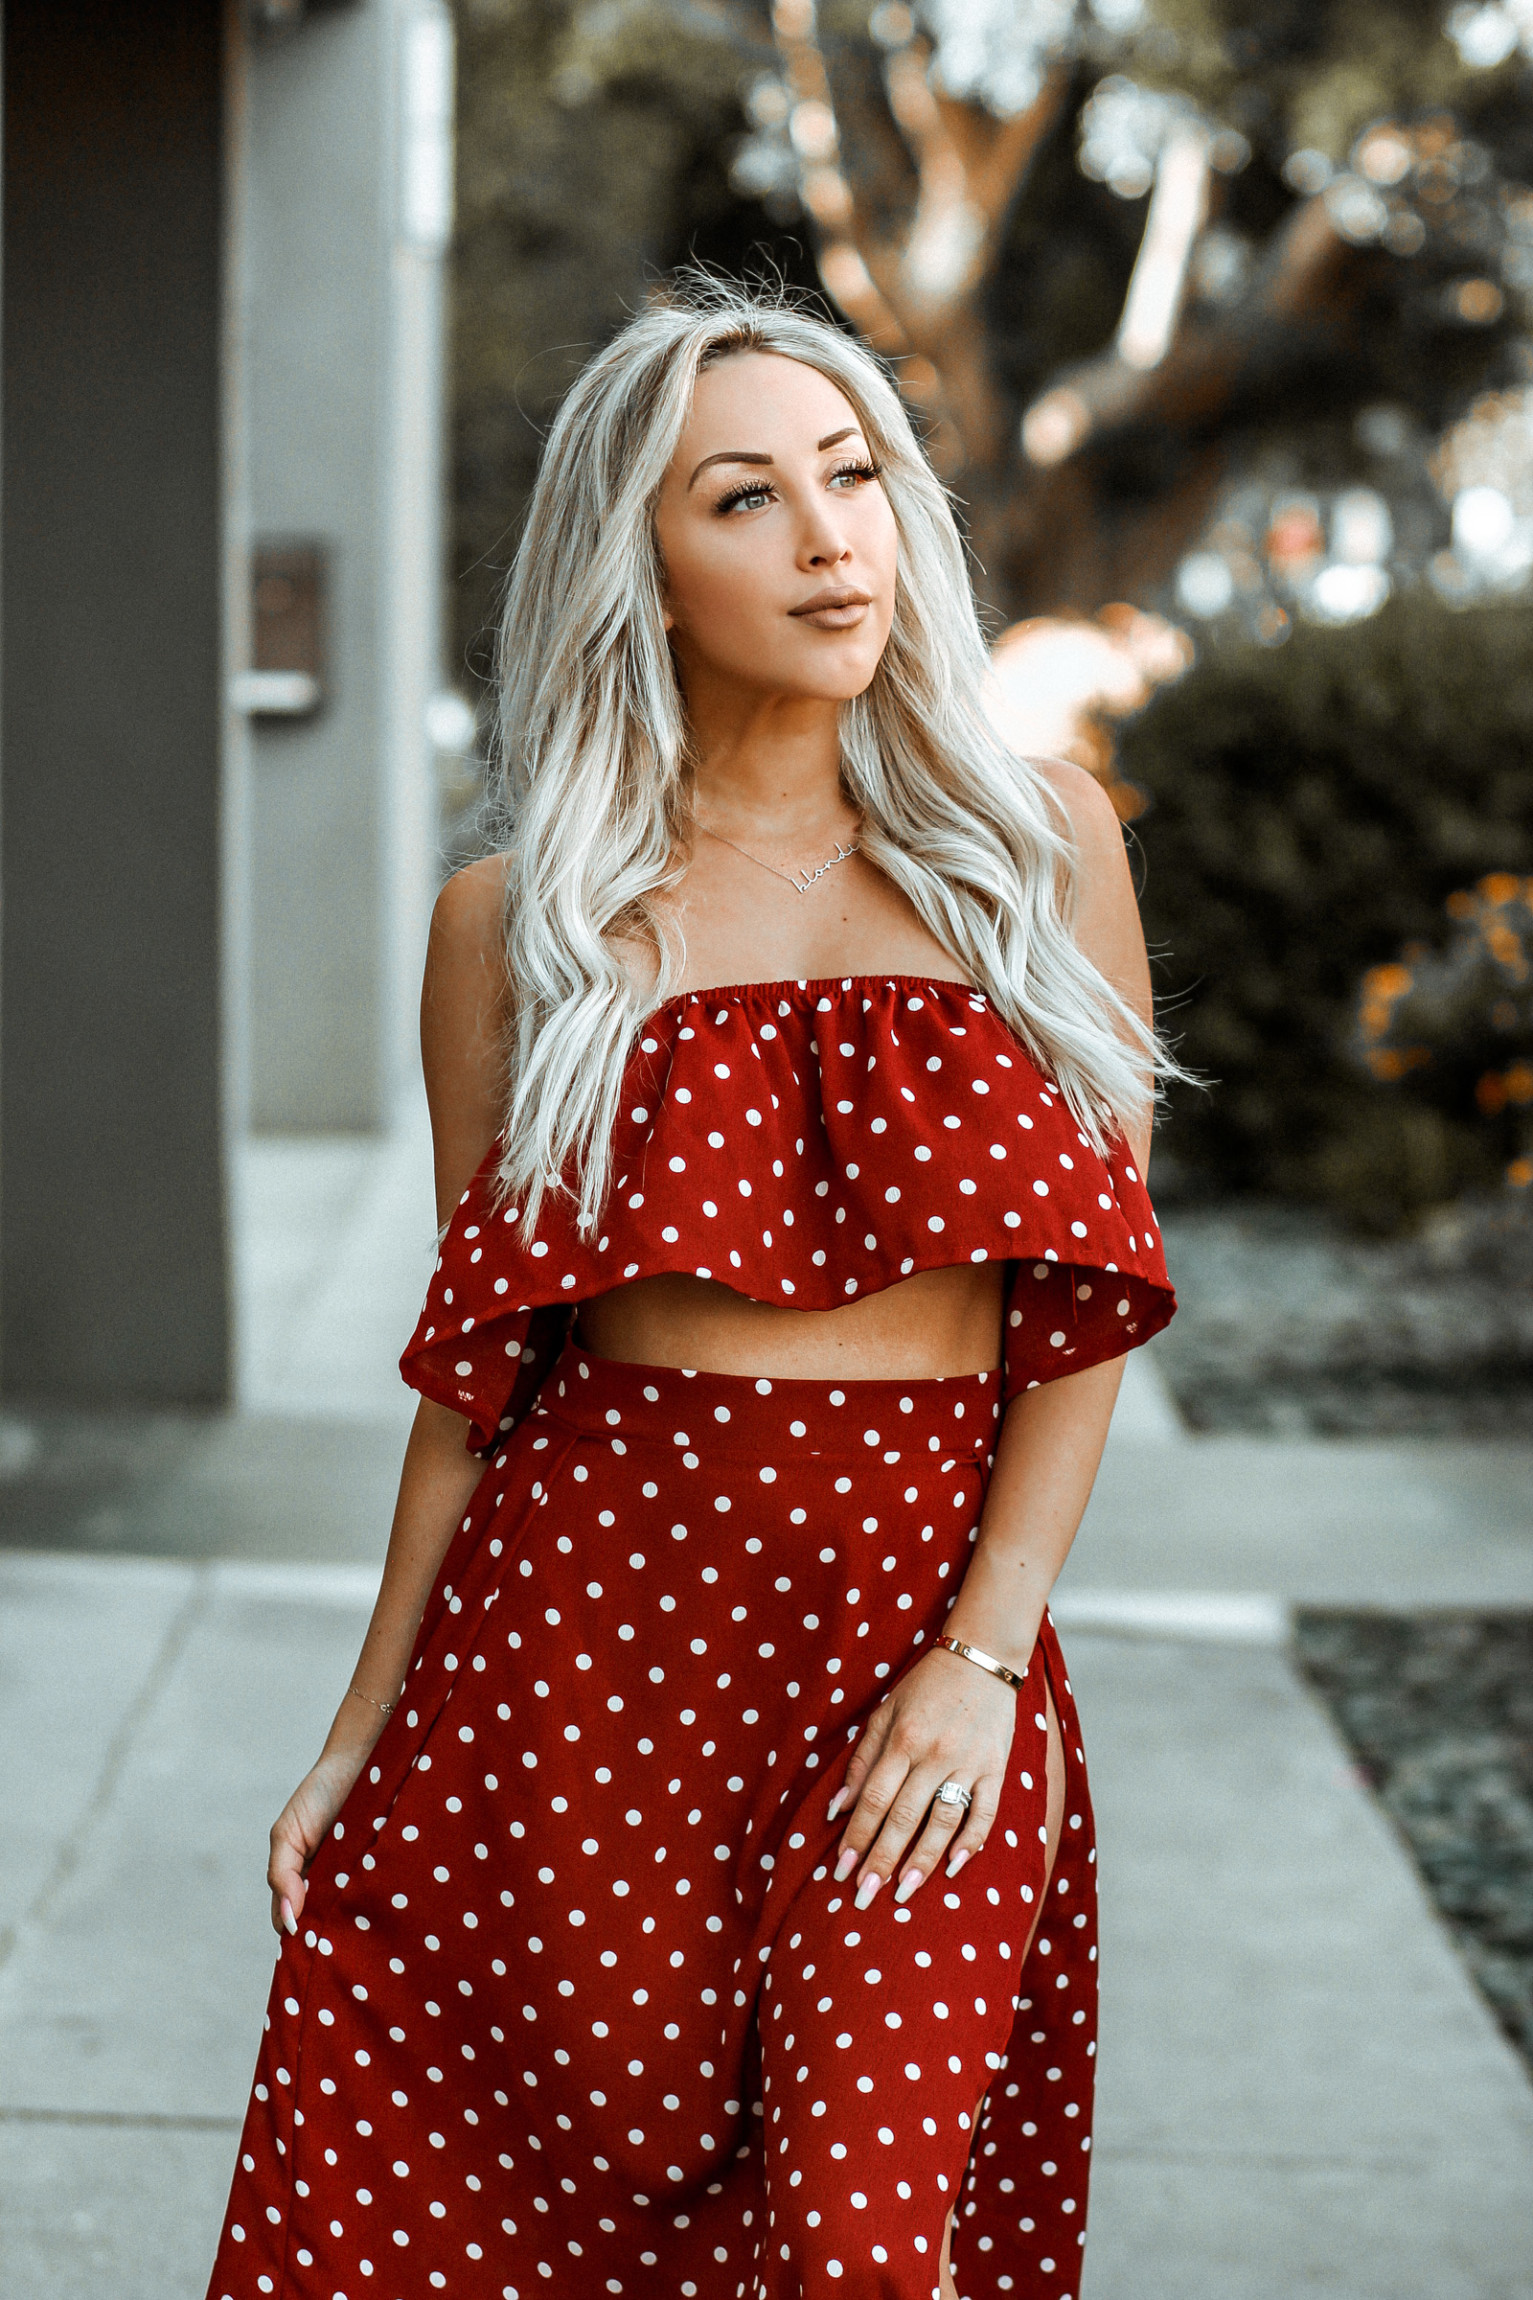 Red Polka Dot Two-Piece | Summer Style | Blondie in the City by Hayley Larue